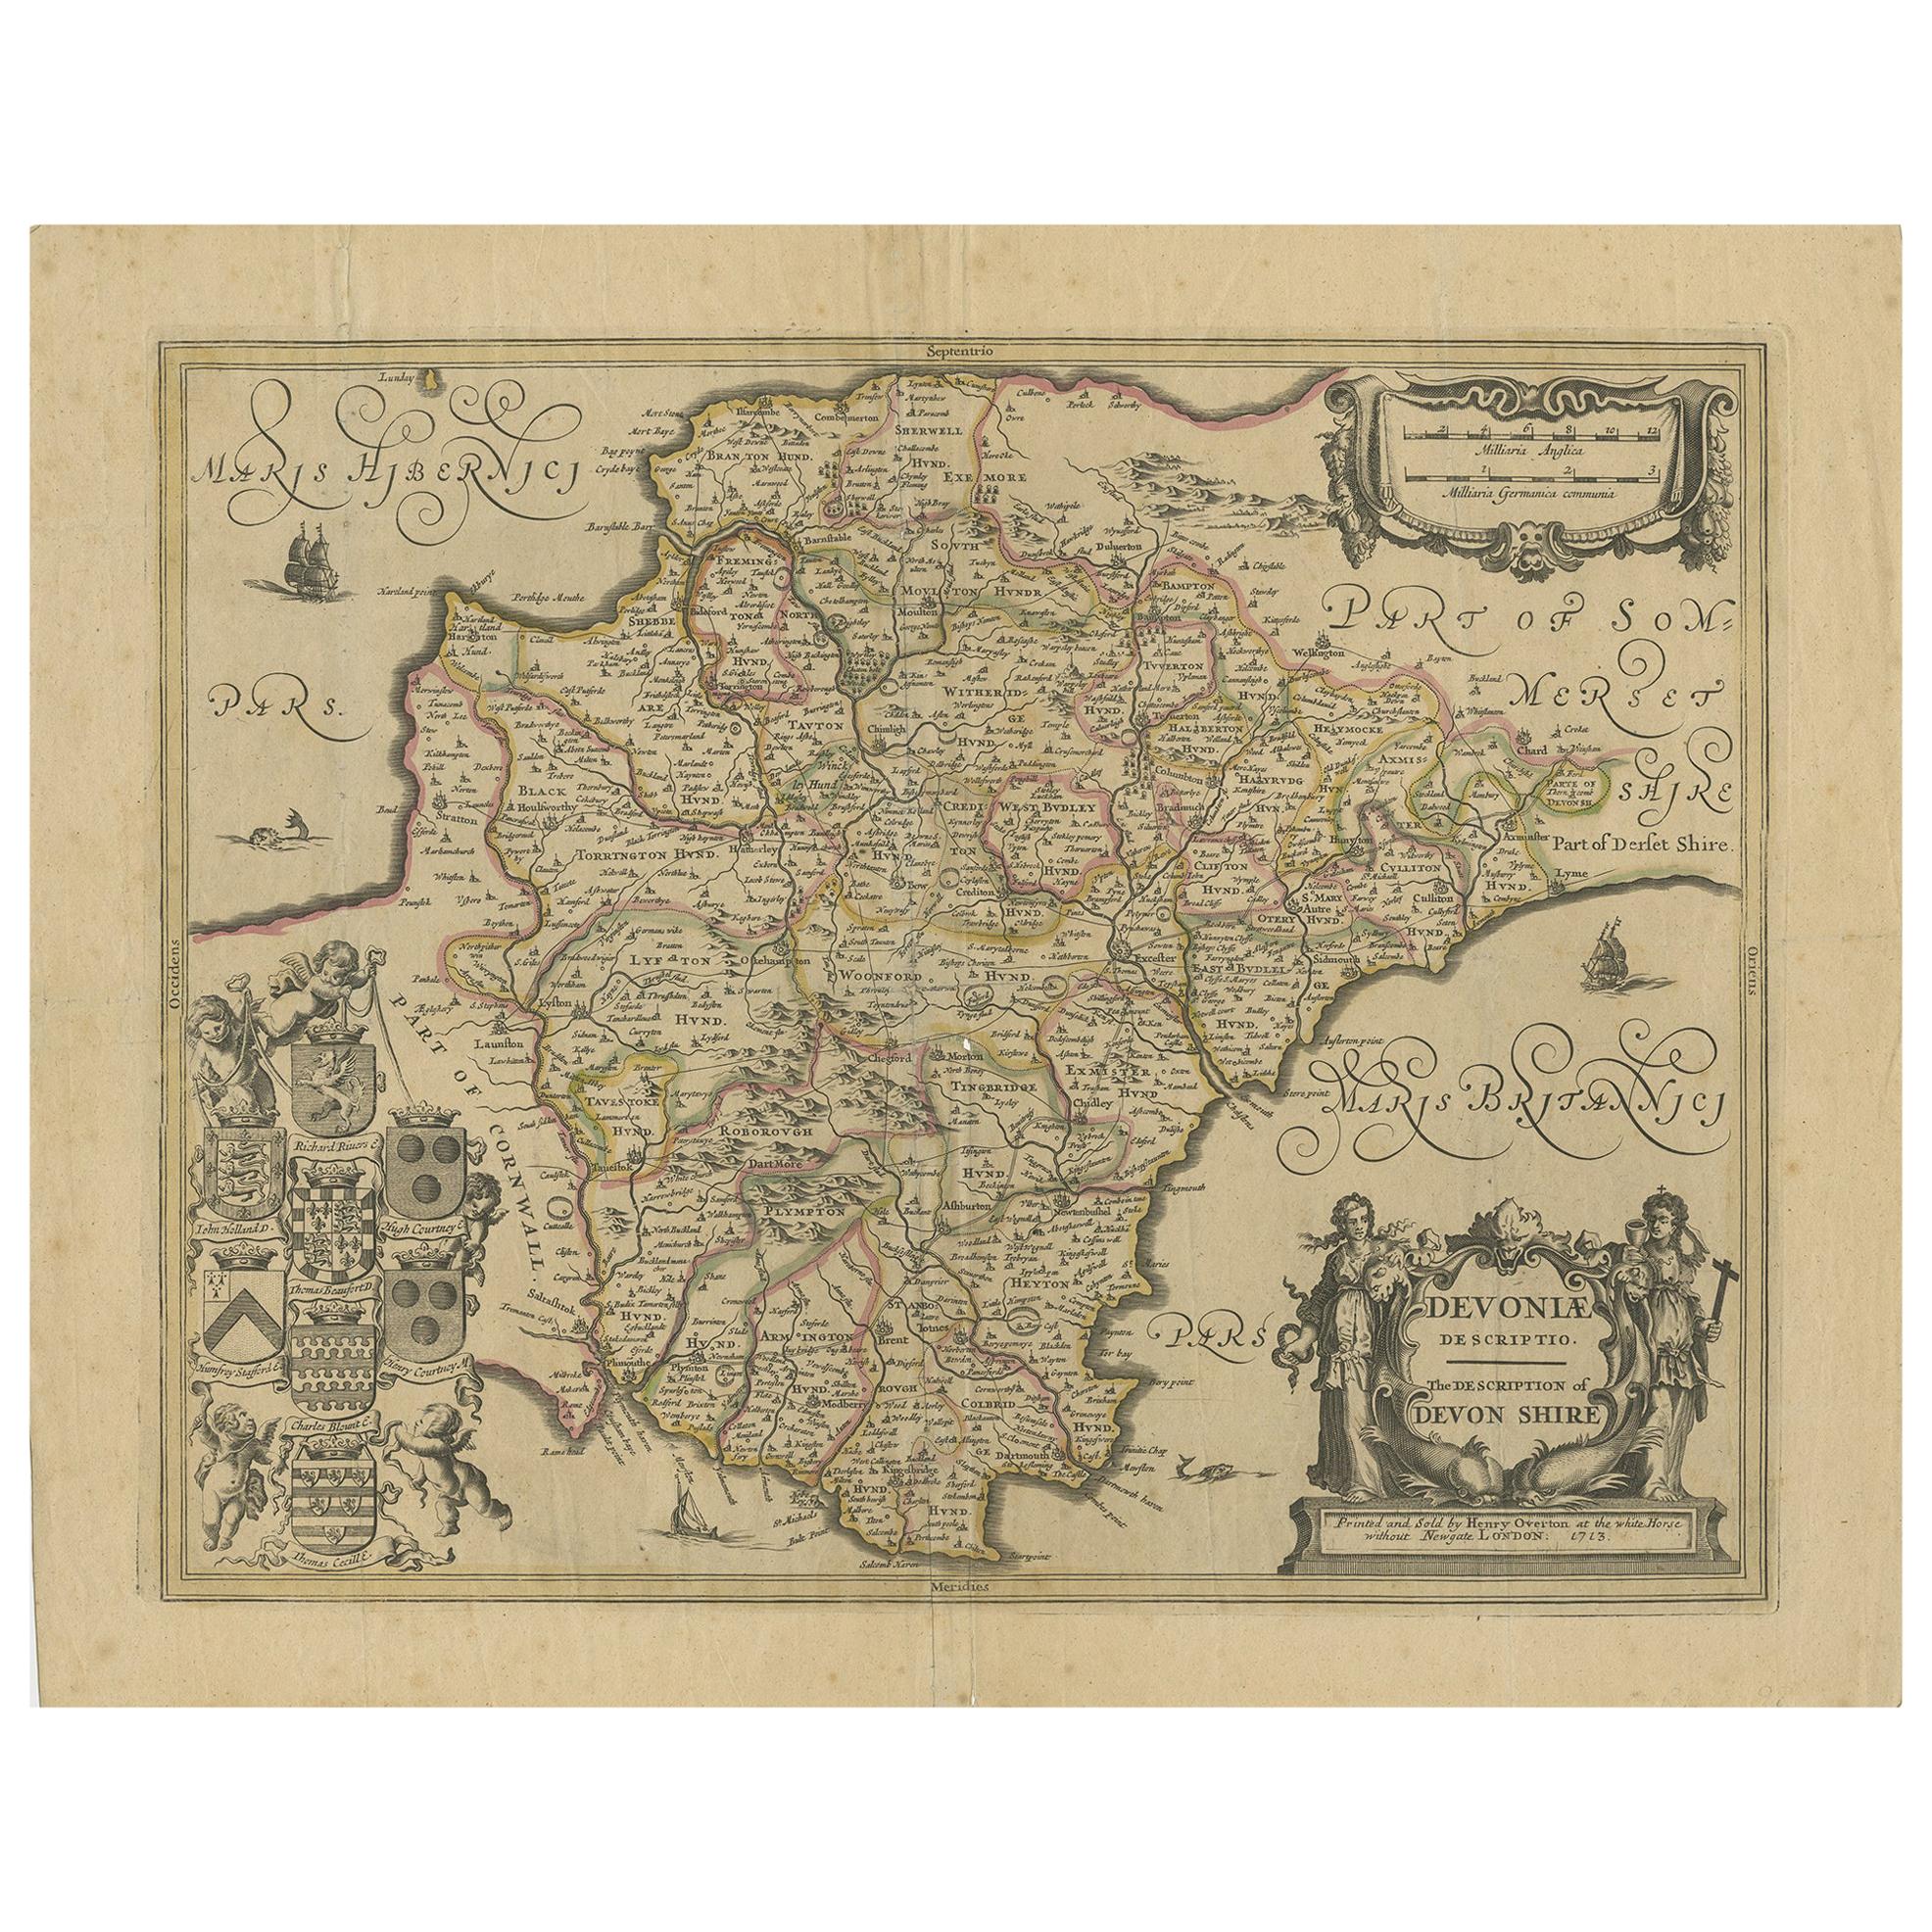 Antique Map of the County of Devon by Overton, 1713